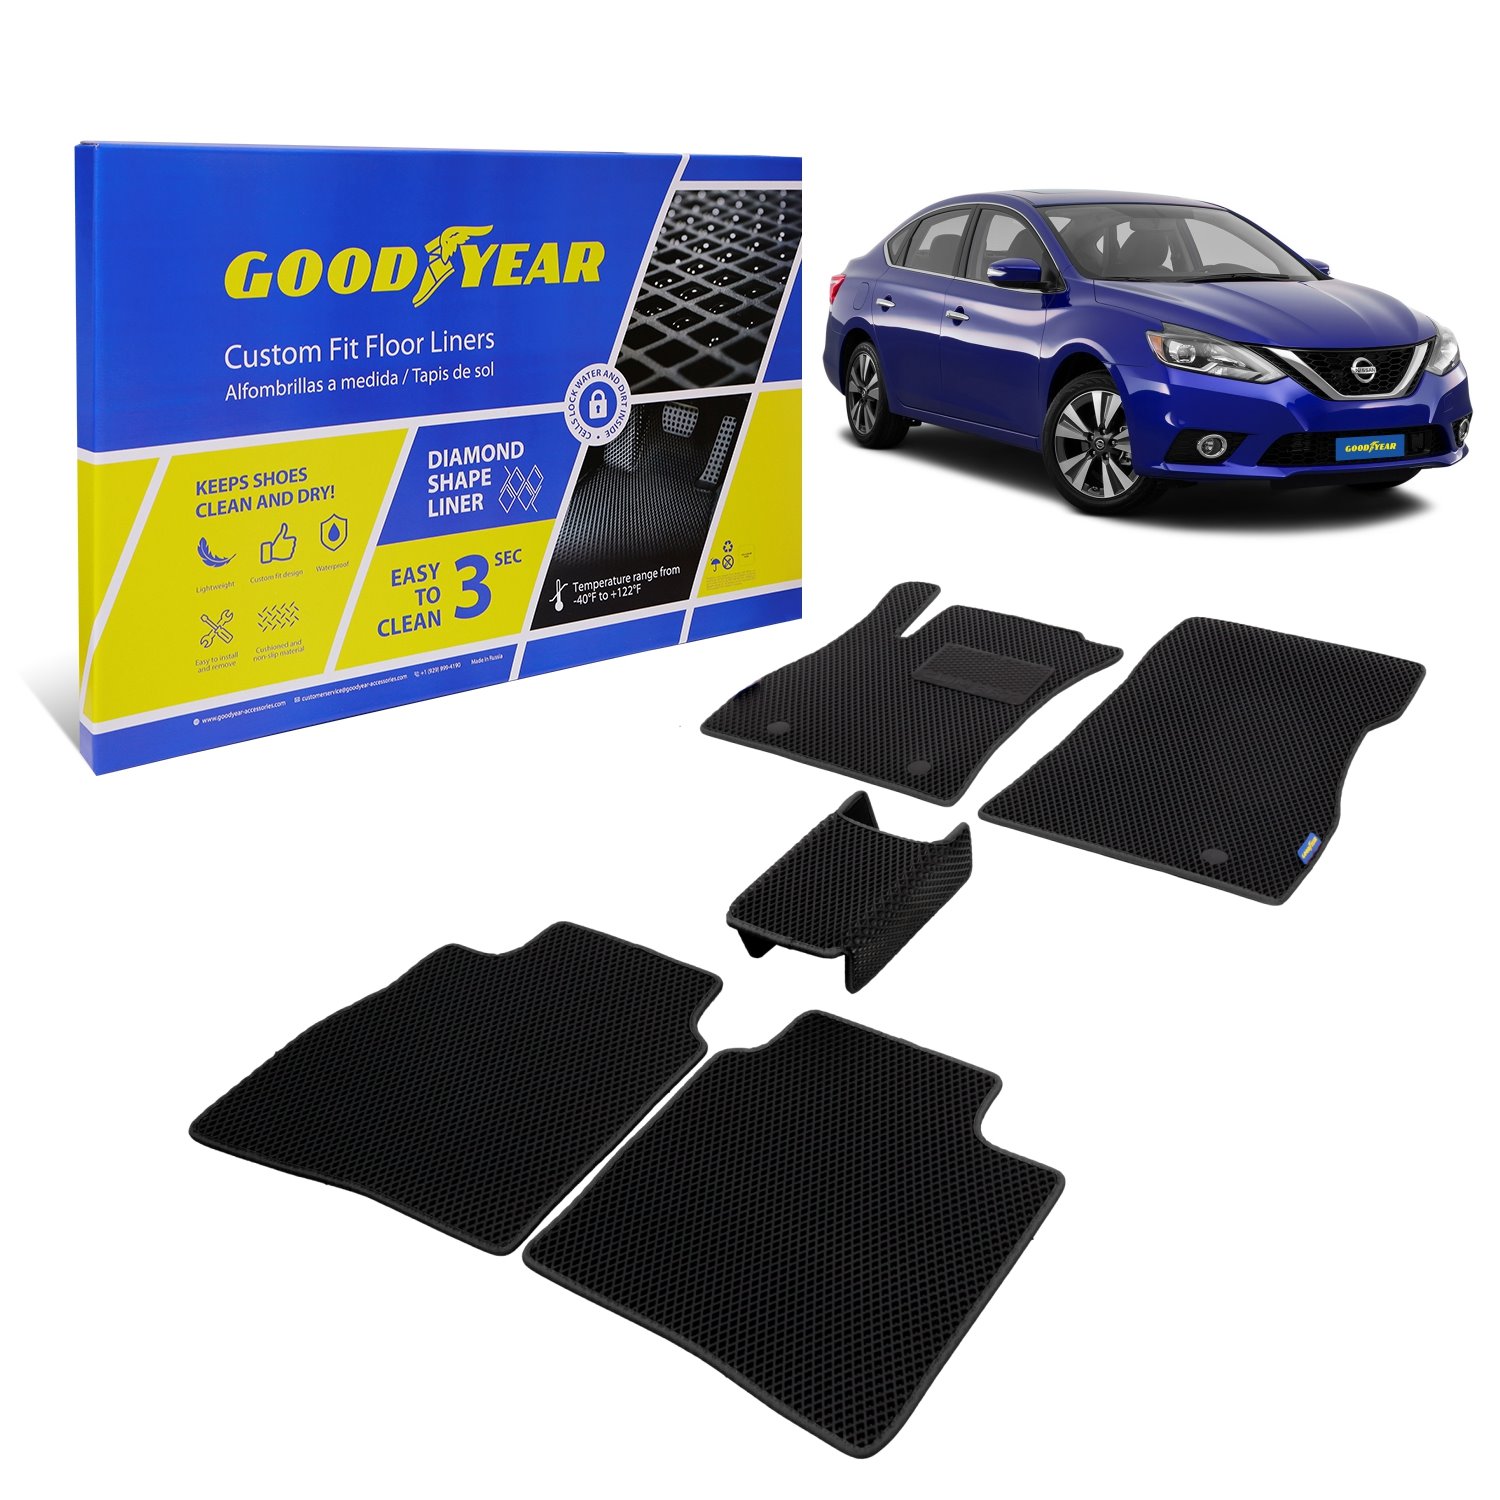 Goodyear Custom-Fit Floor Liners for 2013-2019 Nissan Sentra